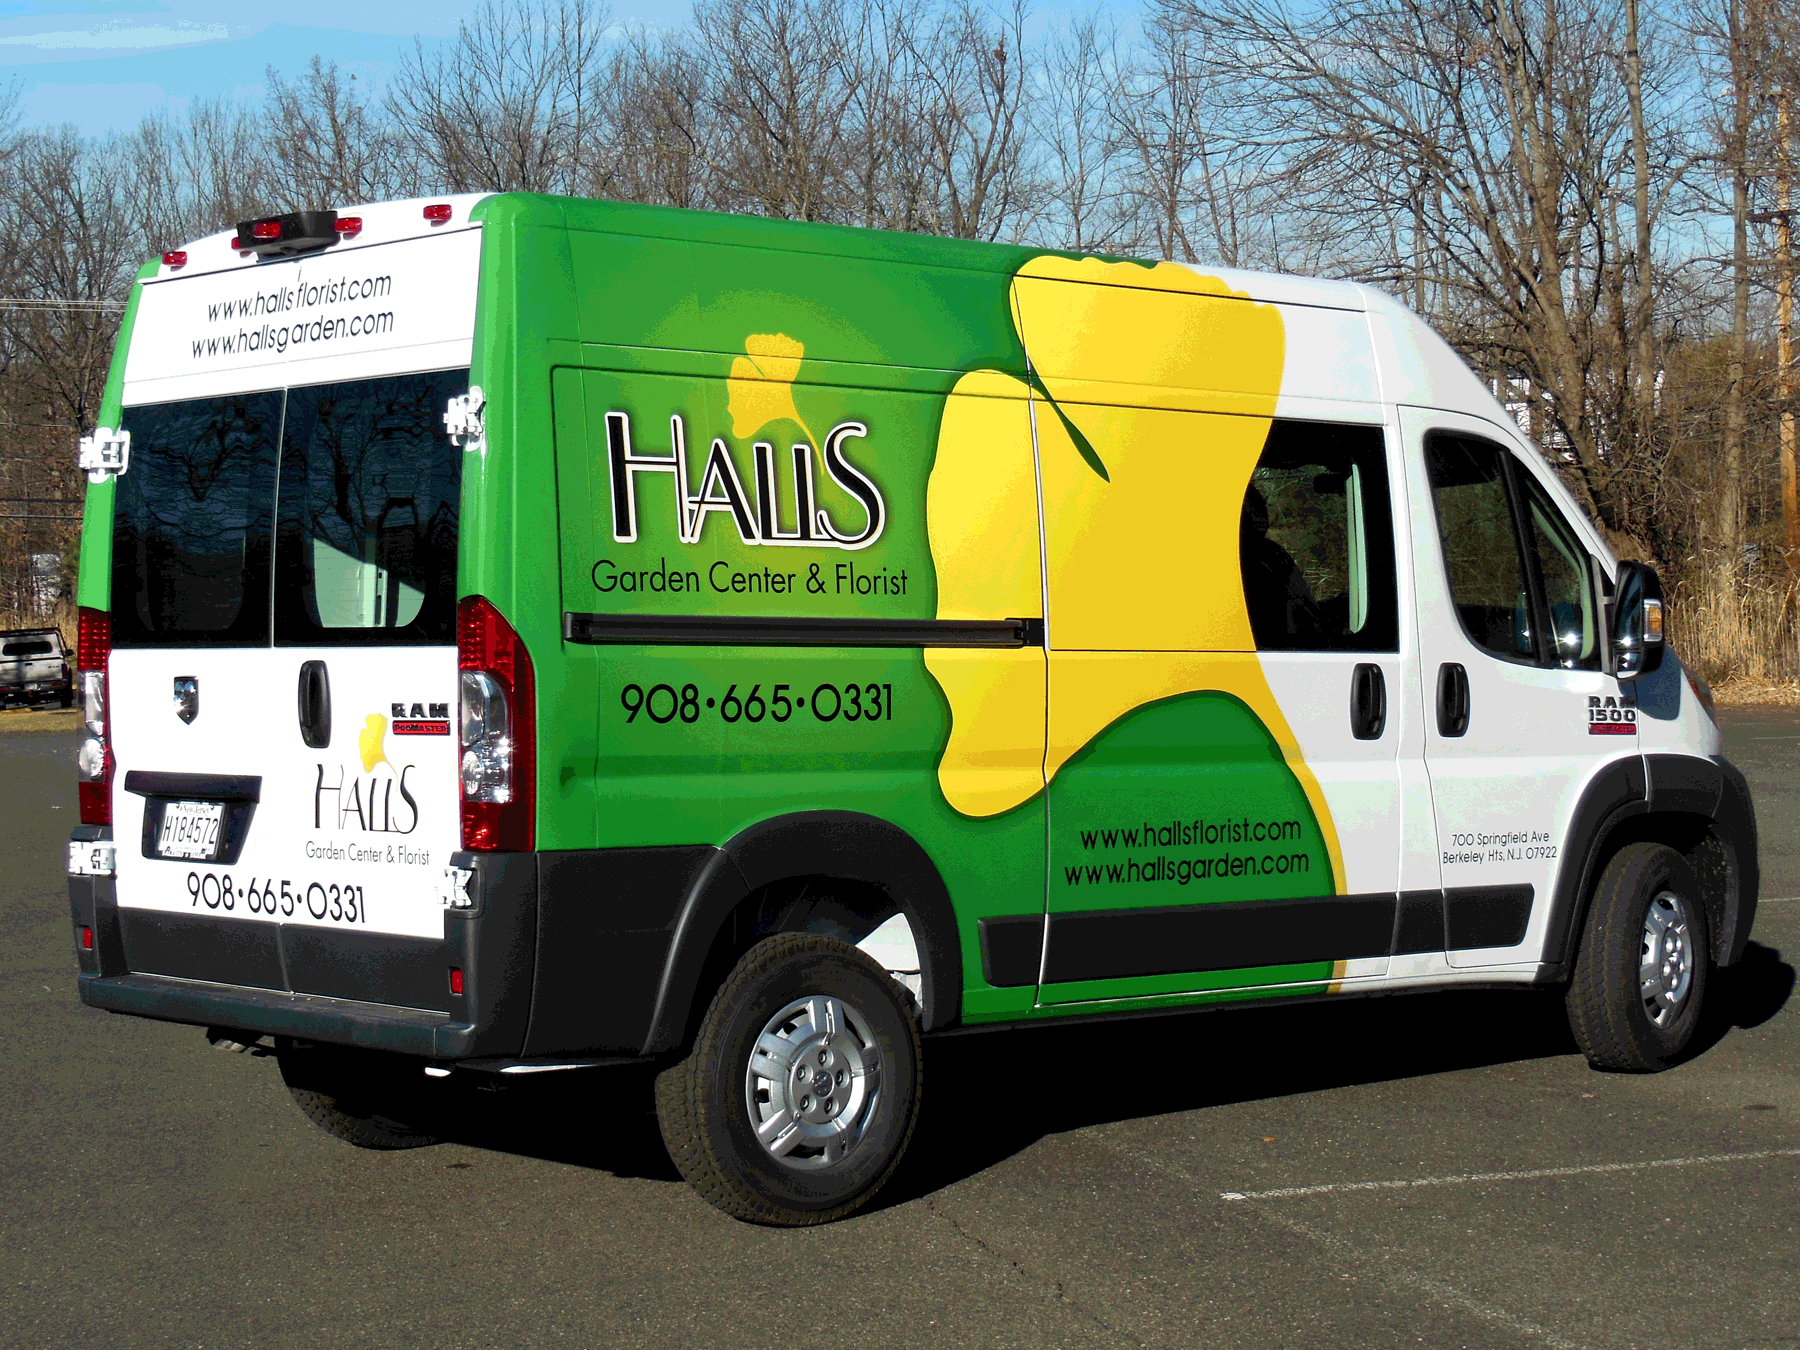 Vehicle wraps and graphics for small businesses in North Jersey